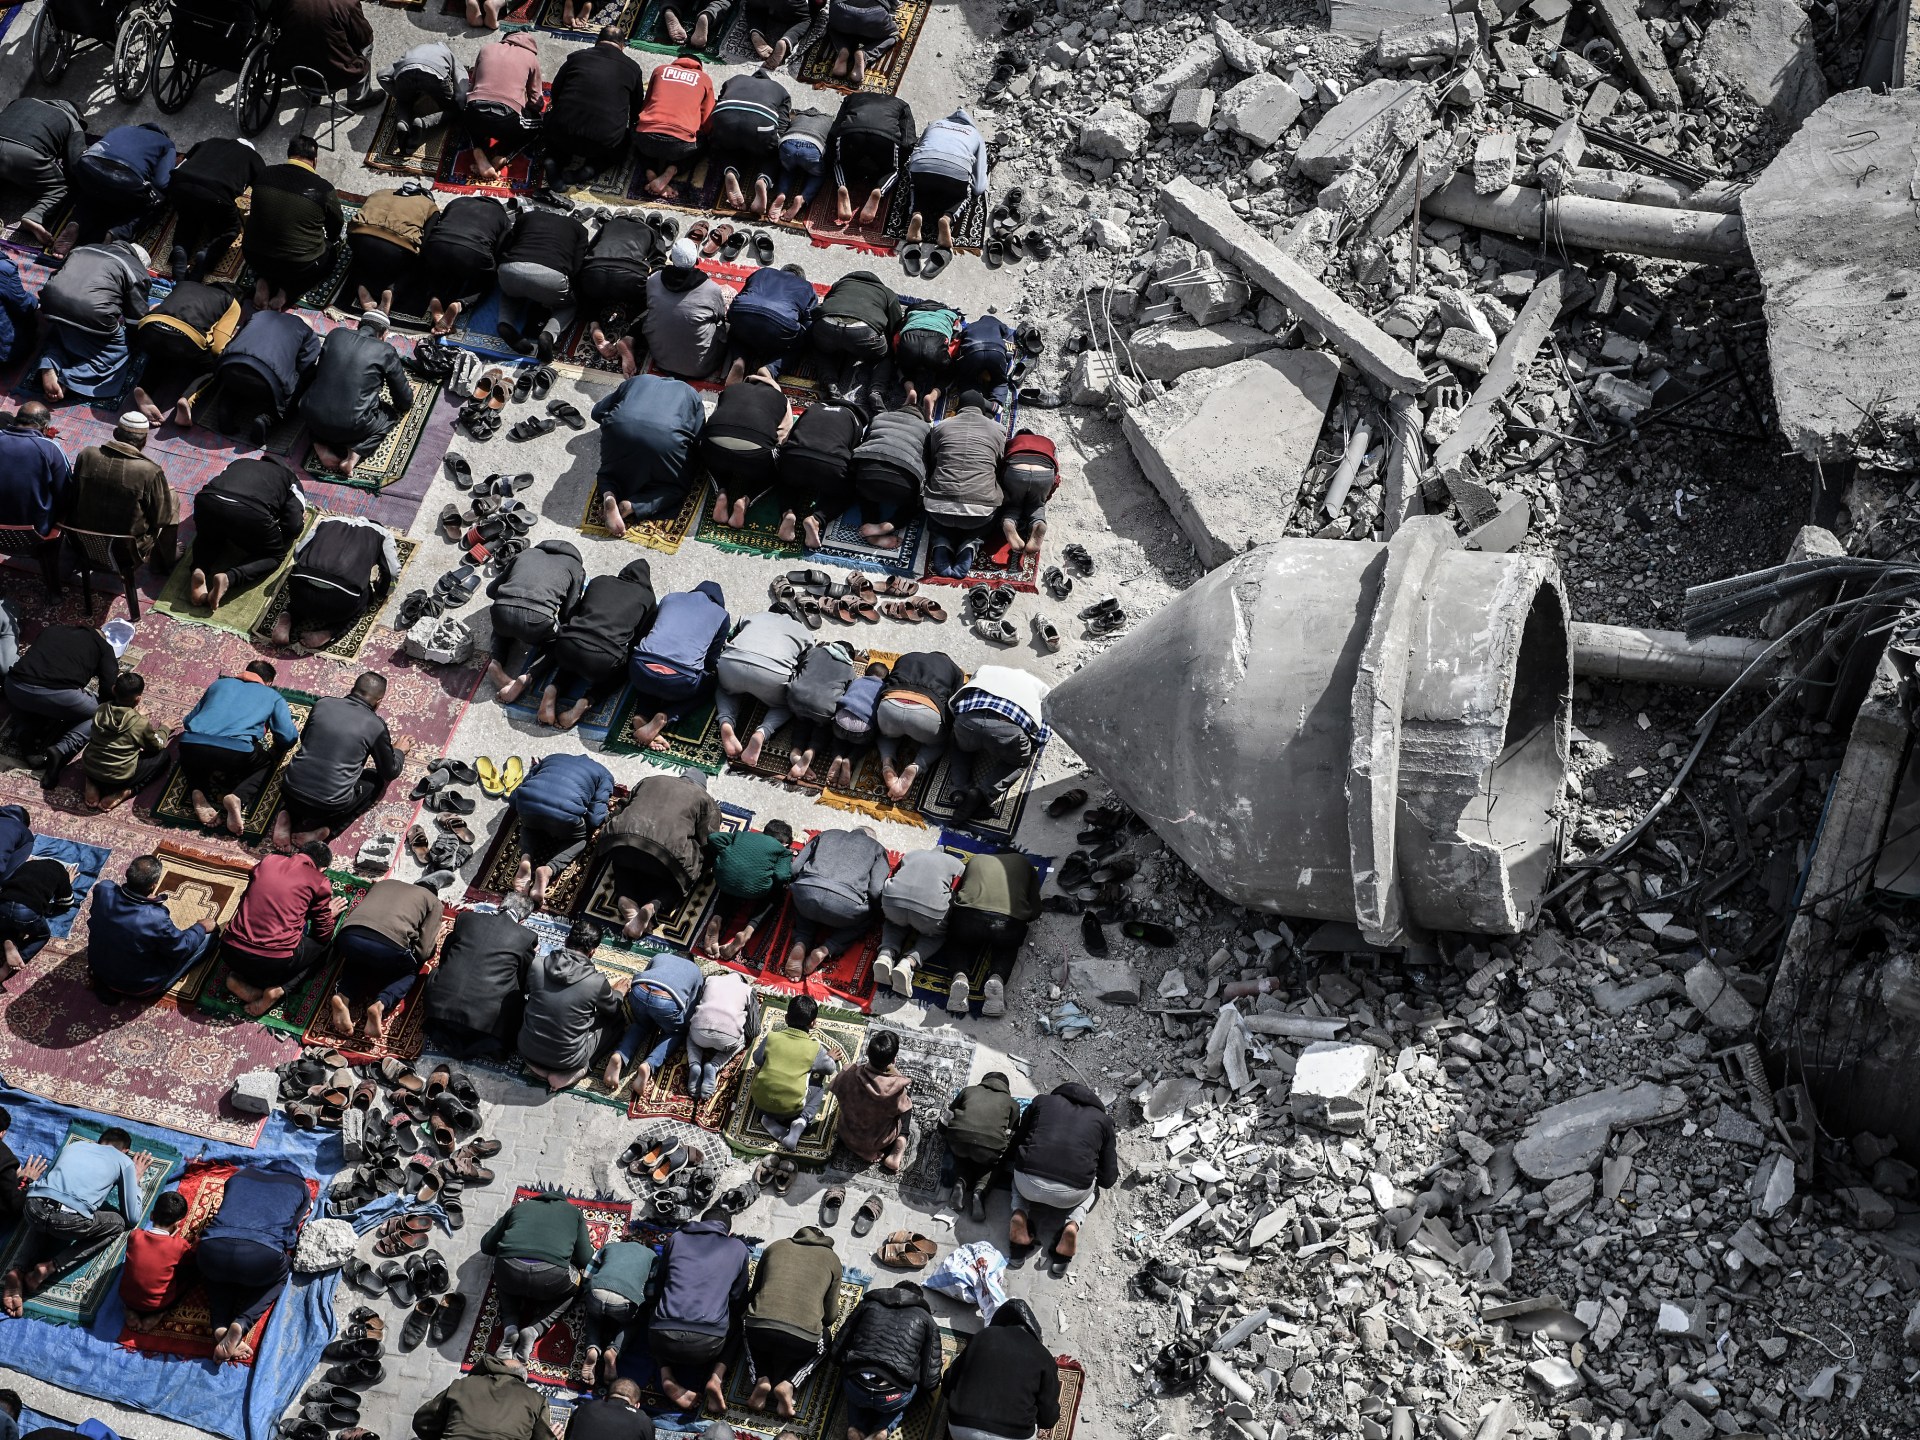 AA-20240301-33853497-33853495-FRIDAY_PRAYERS_OF_PALESTINIANS_AMONG_DESTROYED_MOSQUE_RUBBLE_IN_GAZA_STRIP-1709468351.jpg